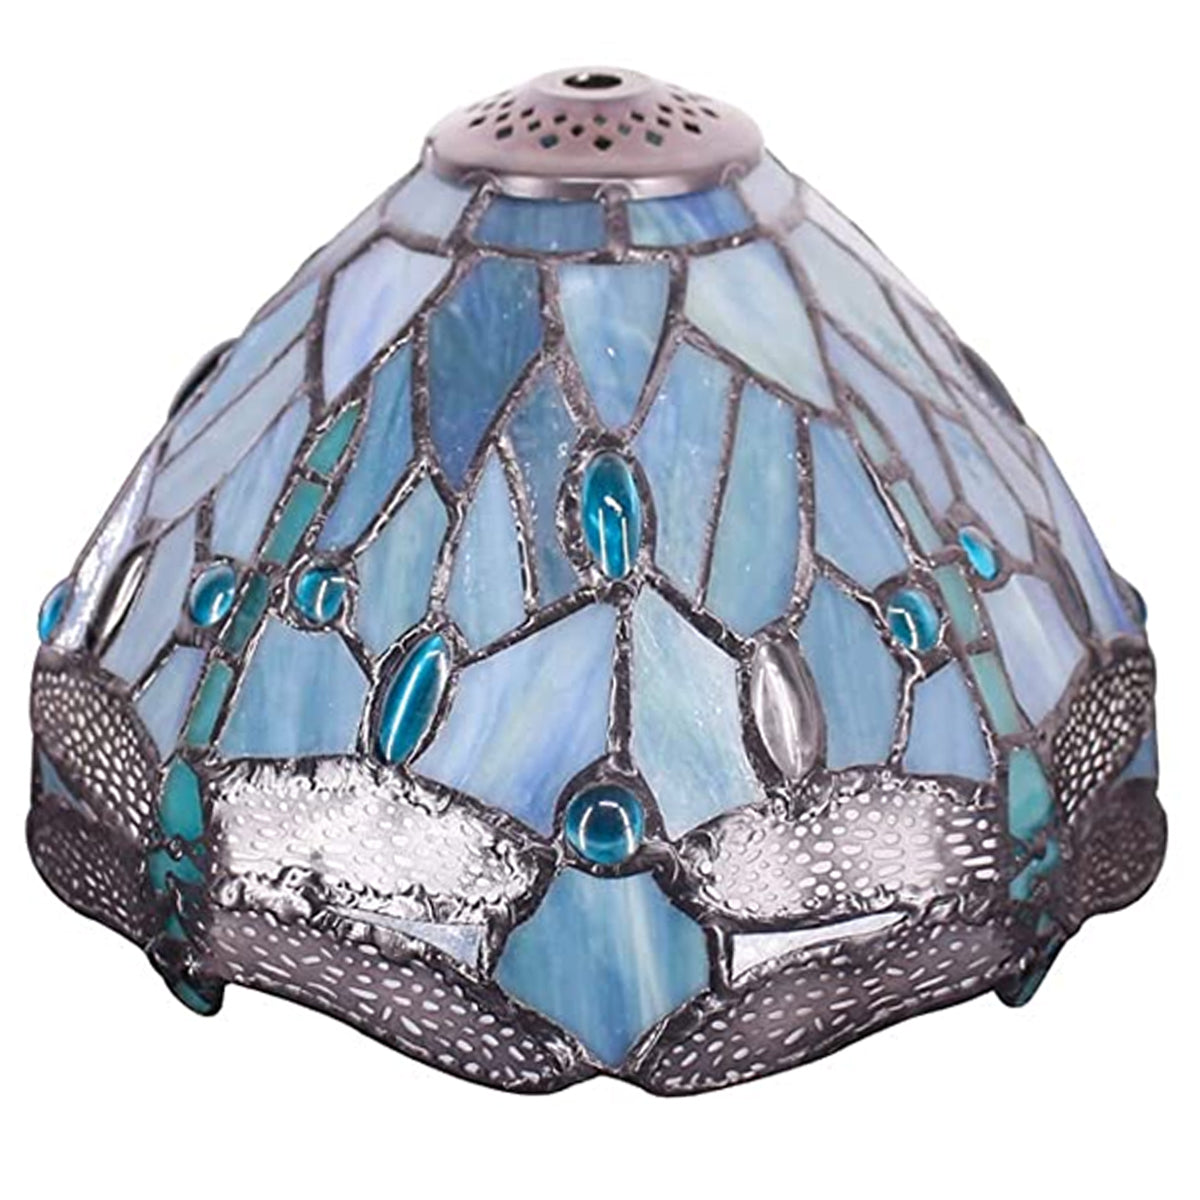 8 Inch Tiffany Lamp Shade Only  Werfactory® Dragonfly Stained Glass lampshade